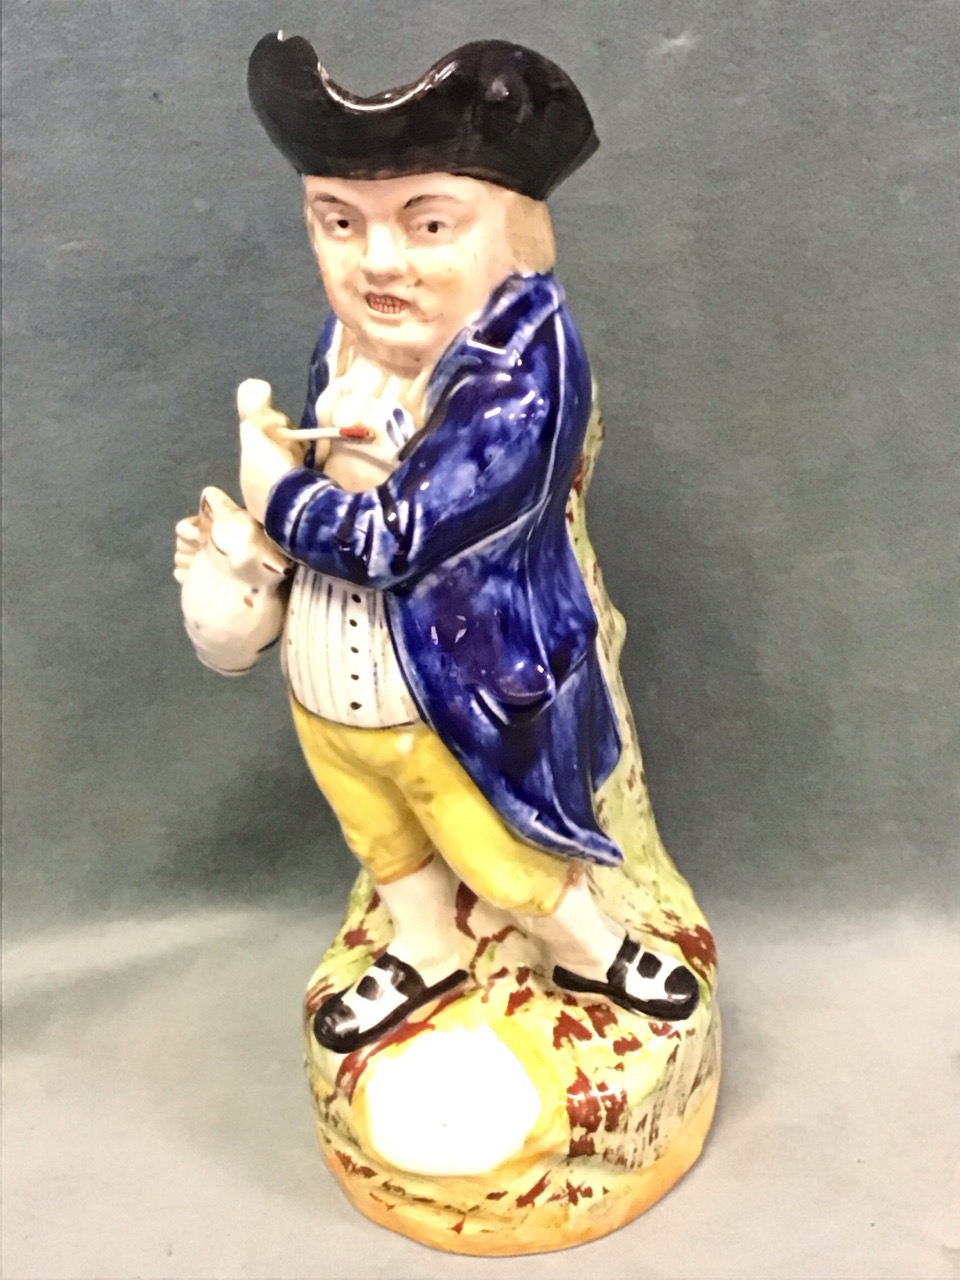 A C19th Staffordshire ceramic hearty goodfellow toby jug, the standing smiling figure holding a pipe